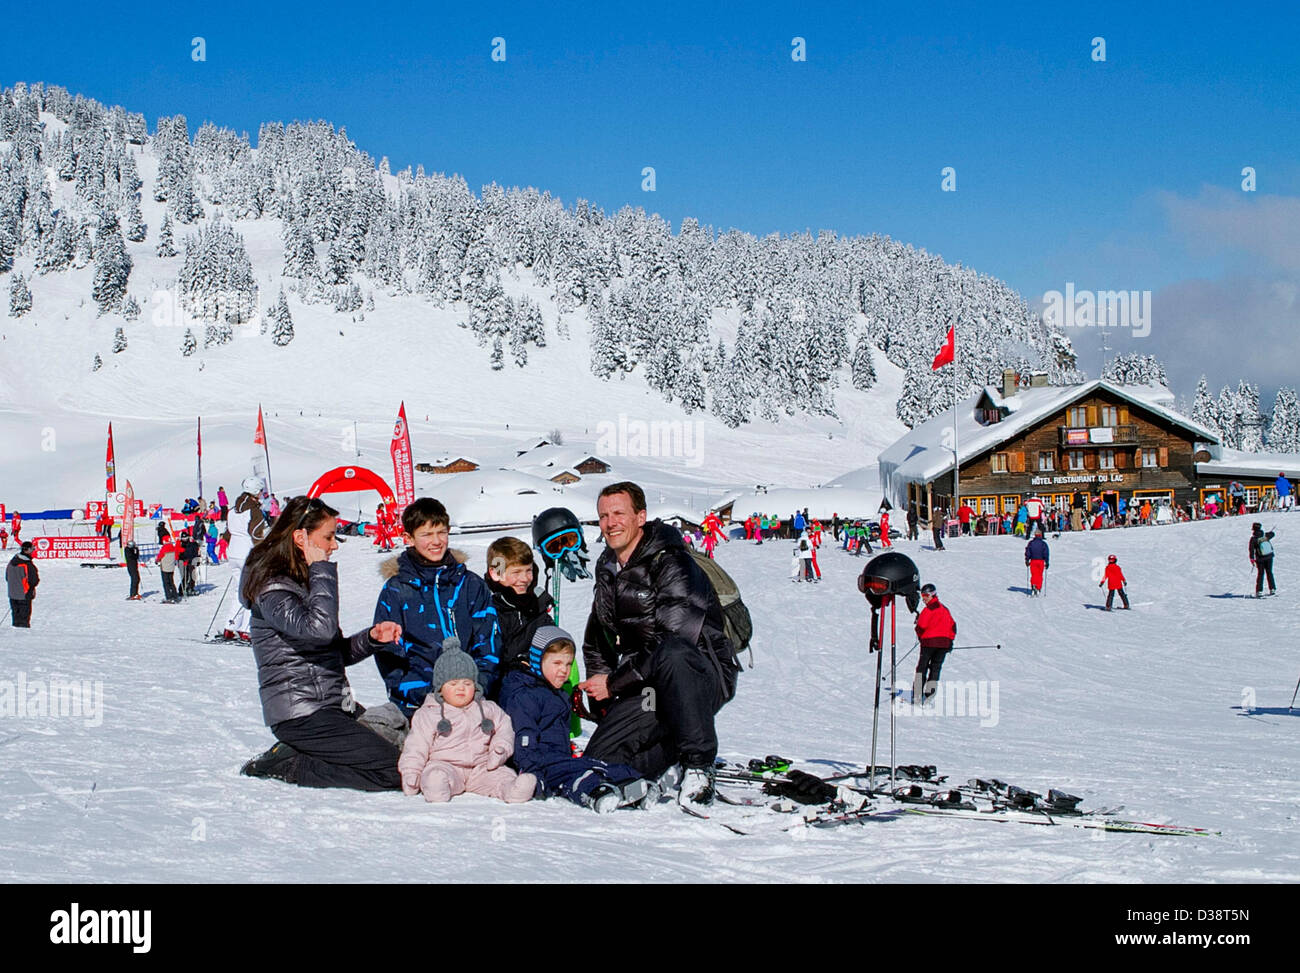 Prince Joachim (R) and Princess Marie of Denmark pose with Prince Henrik and Princess Athena (front, L-R), Prince Nikolai and Prinz Felix (back, L-R) for the media at Col-de-Bretaye in Villars, 13 February 2013. The family is on a winter holiday in Switzerland. Photo: Albert Nieboer /RPE/NETHERLANDS OUT Stock Photo